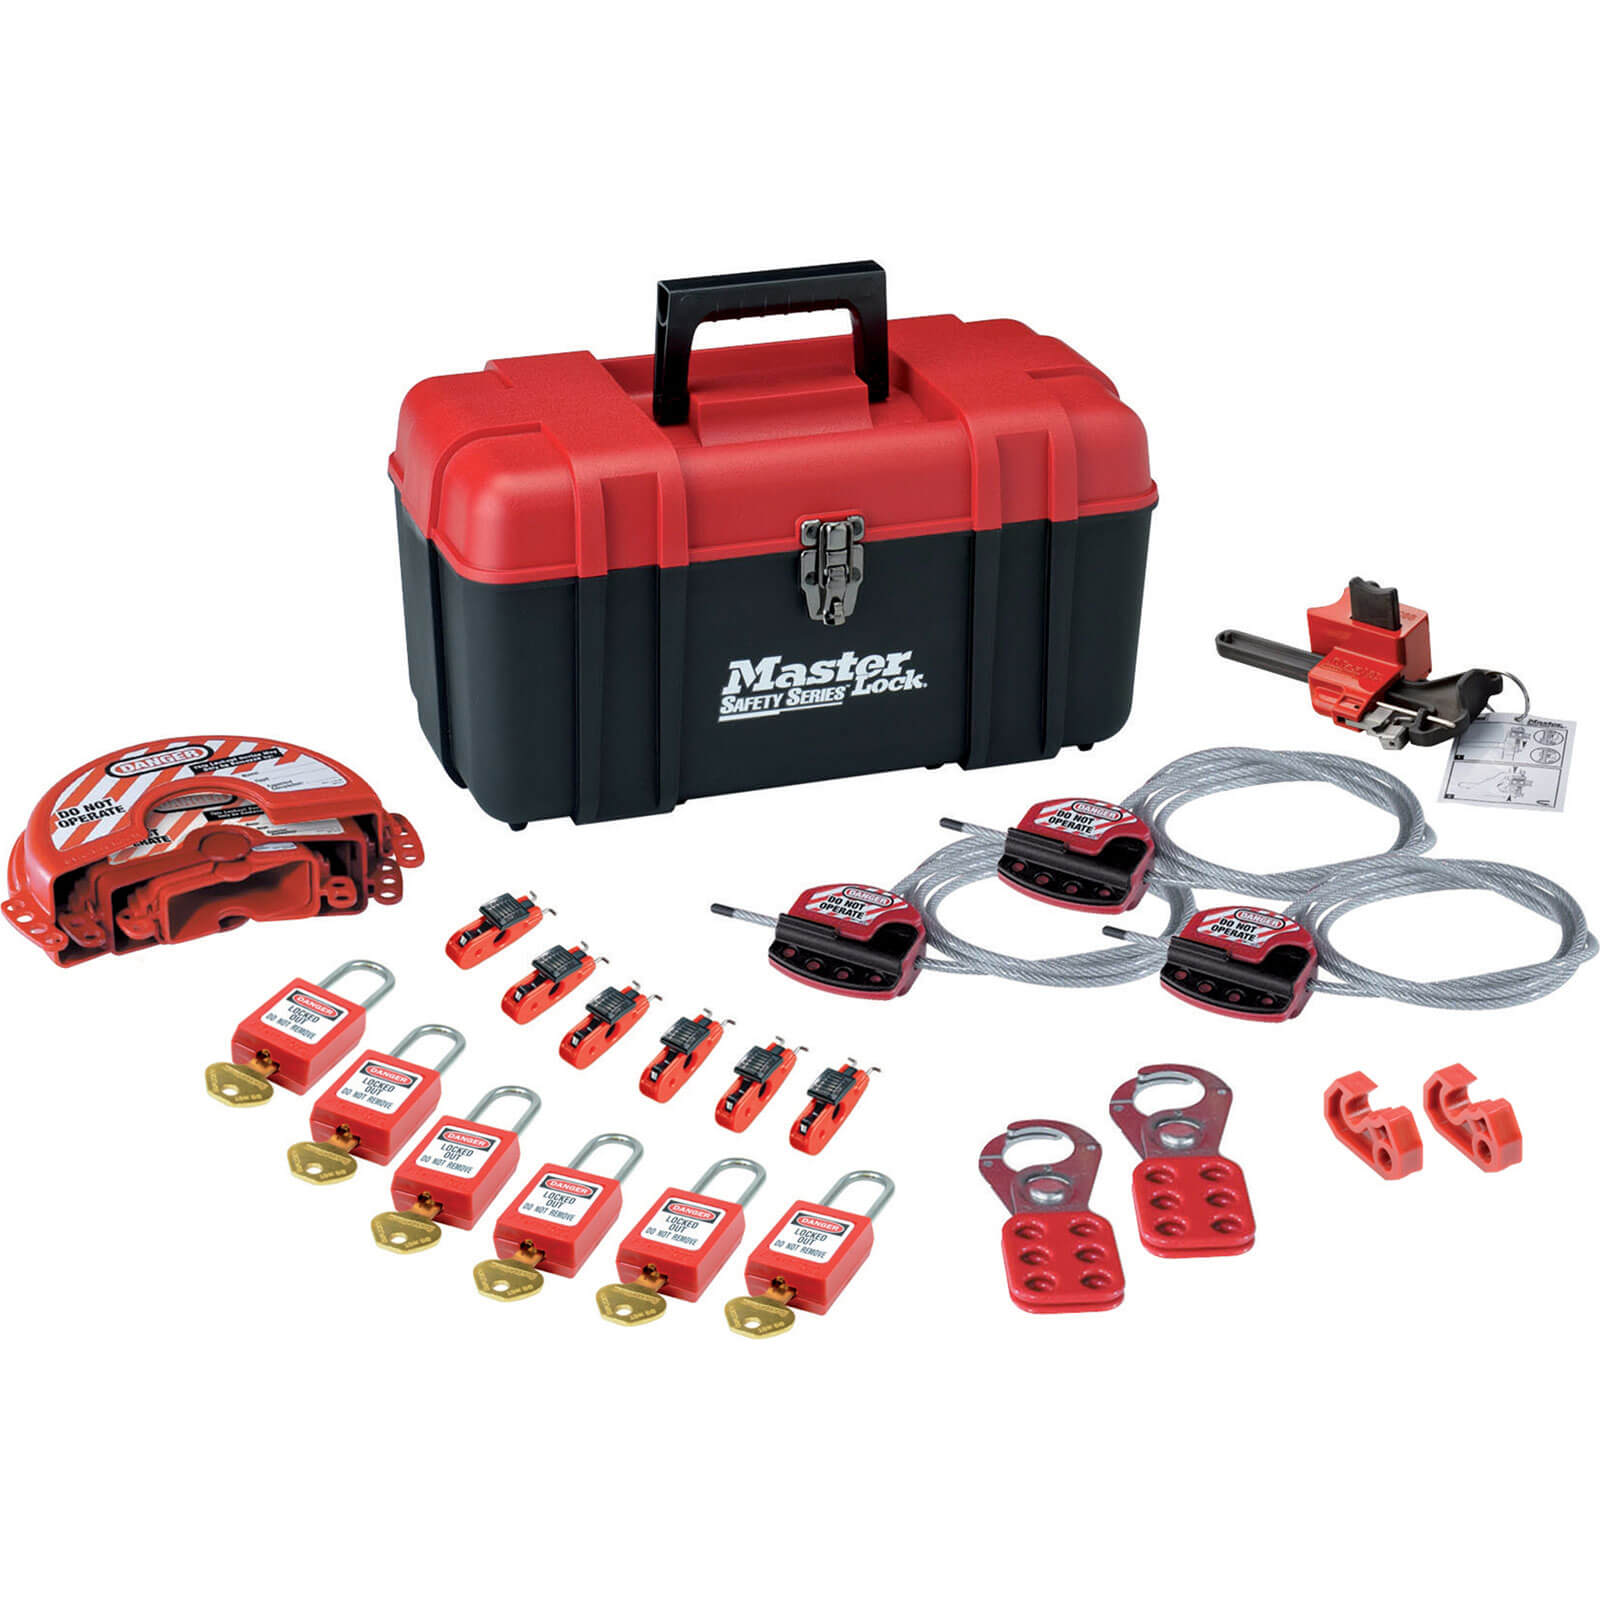 MasterLock 23 Piece Lockout Toolbox Kit for Valve & Electrical Devices